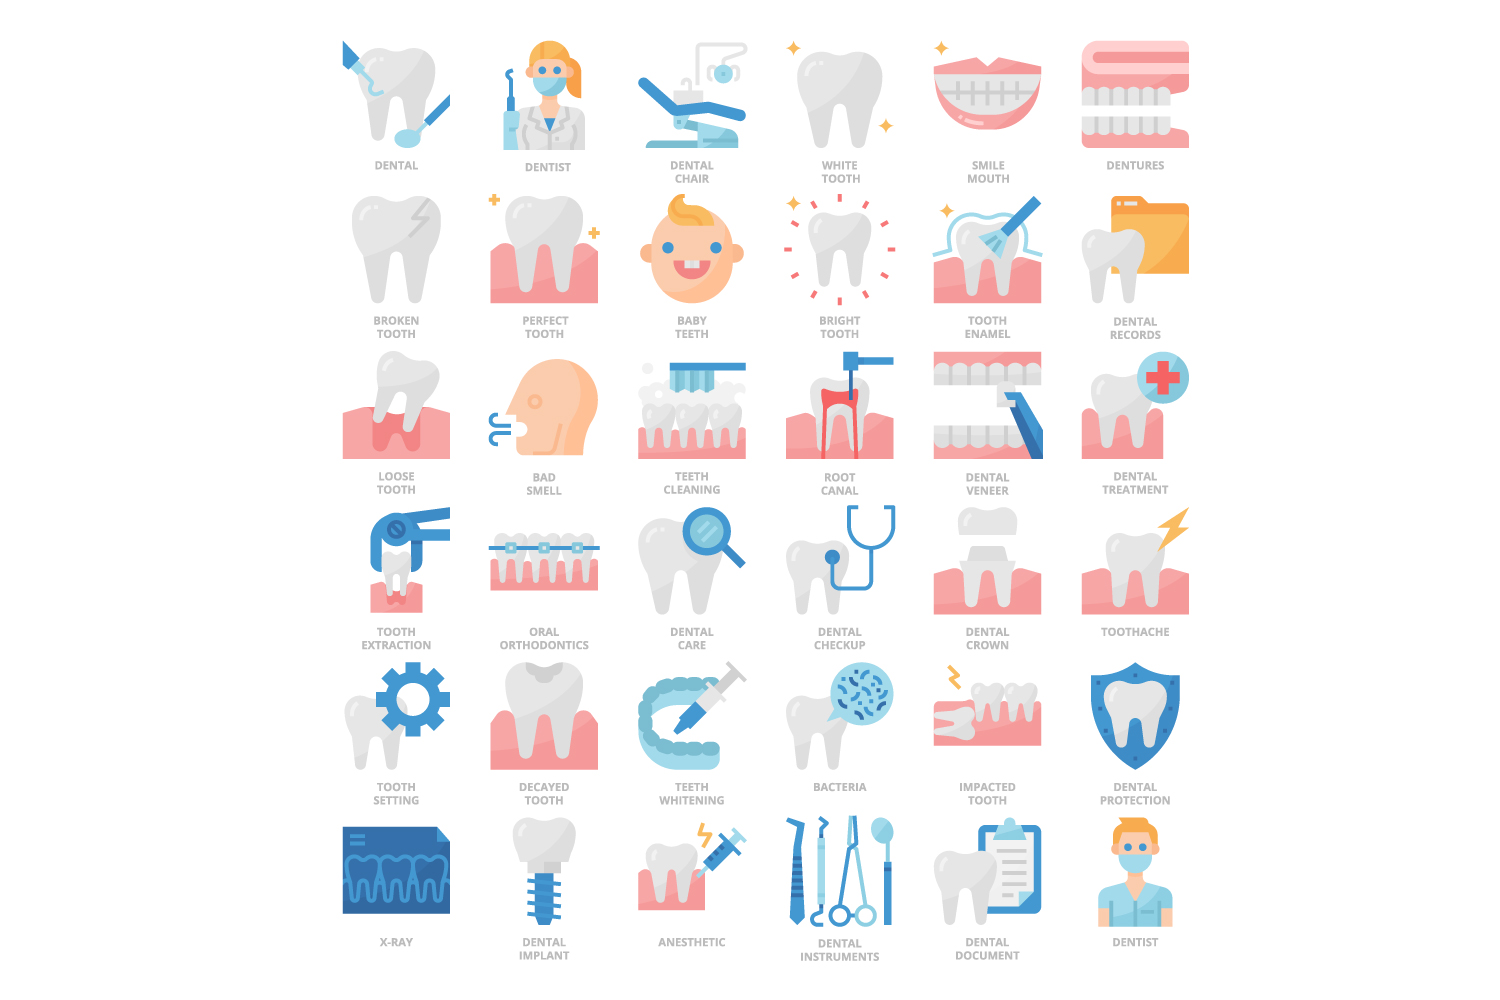 Diagram of dental hygiene that includes toothbrushes.